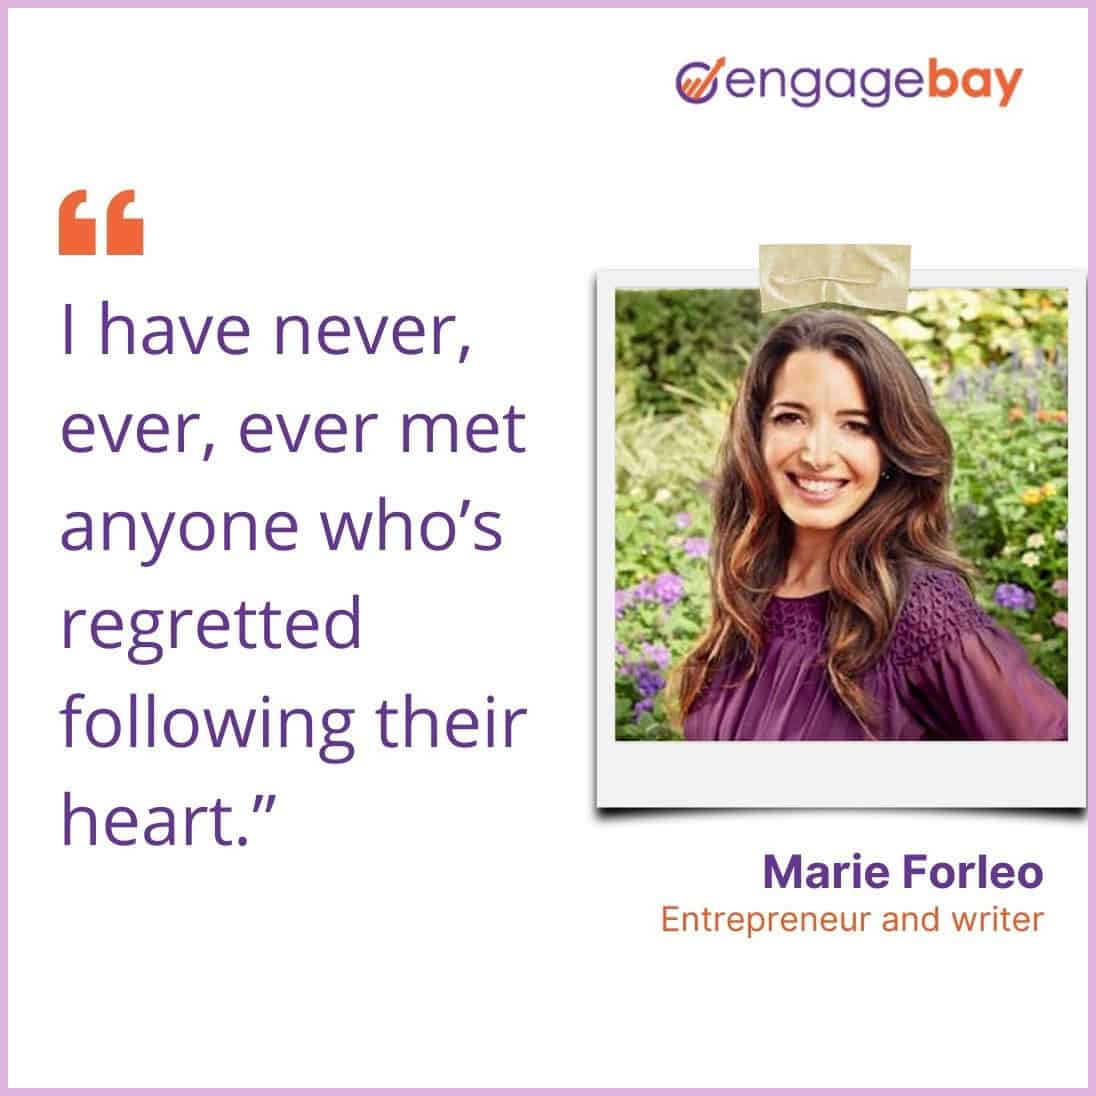 Marie Forleo quotes